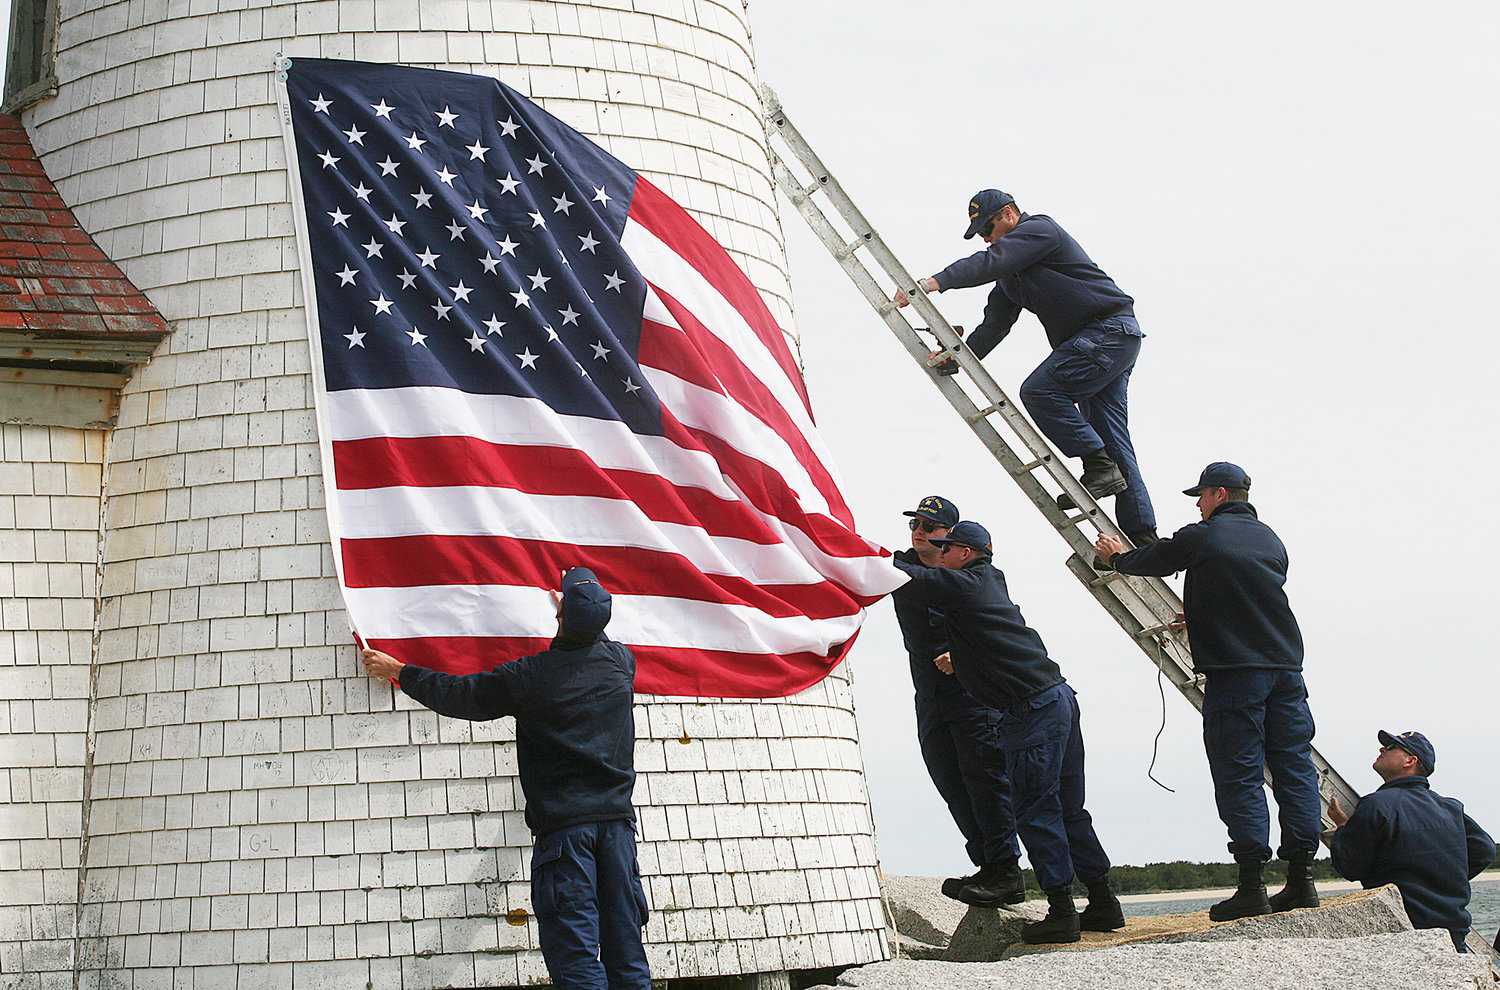 A crew from the US Coast Guard Station Brant Point takes down the daffodil wreath and puts up a flag in honor of Memorial Day and the Fourth of July at the Brant Point lighthouse.